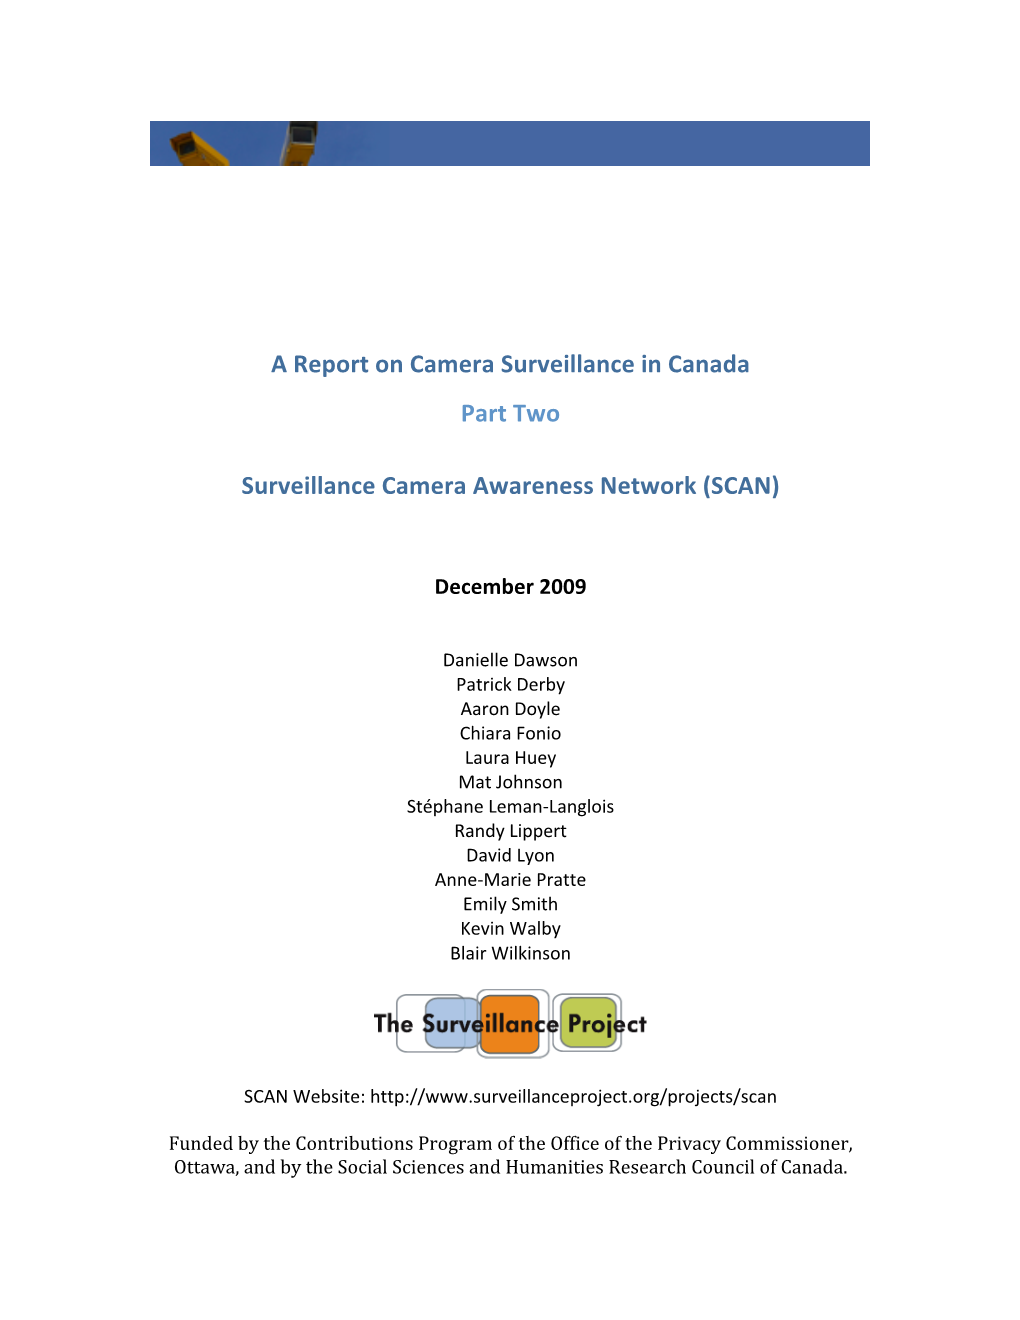 A Report on Camera Surveillance in Canada Part Two